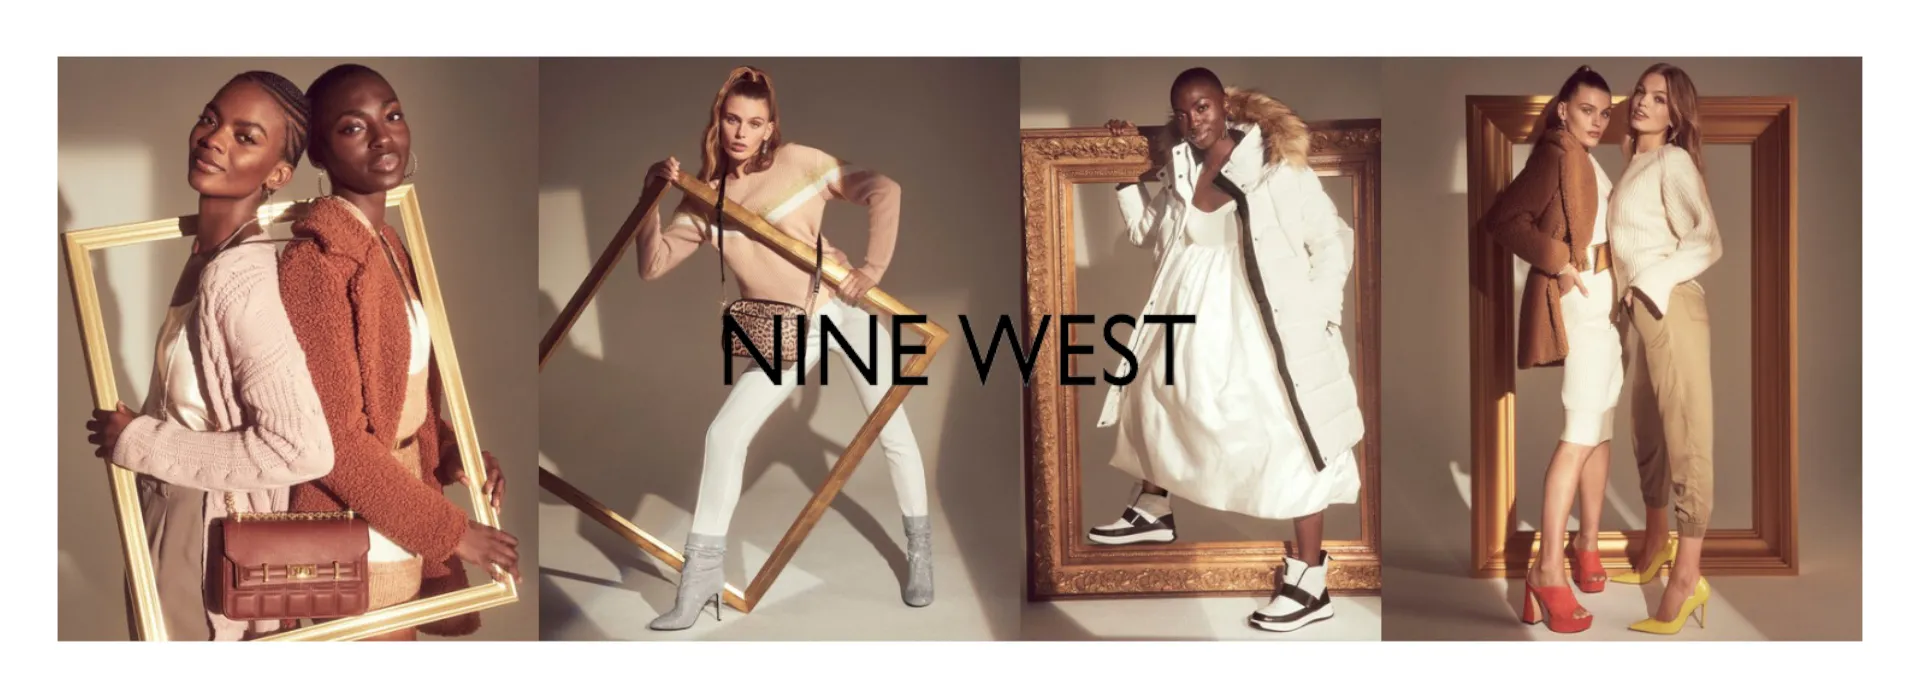 NINE WEST - featured image